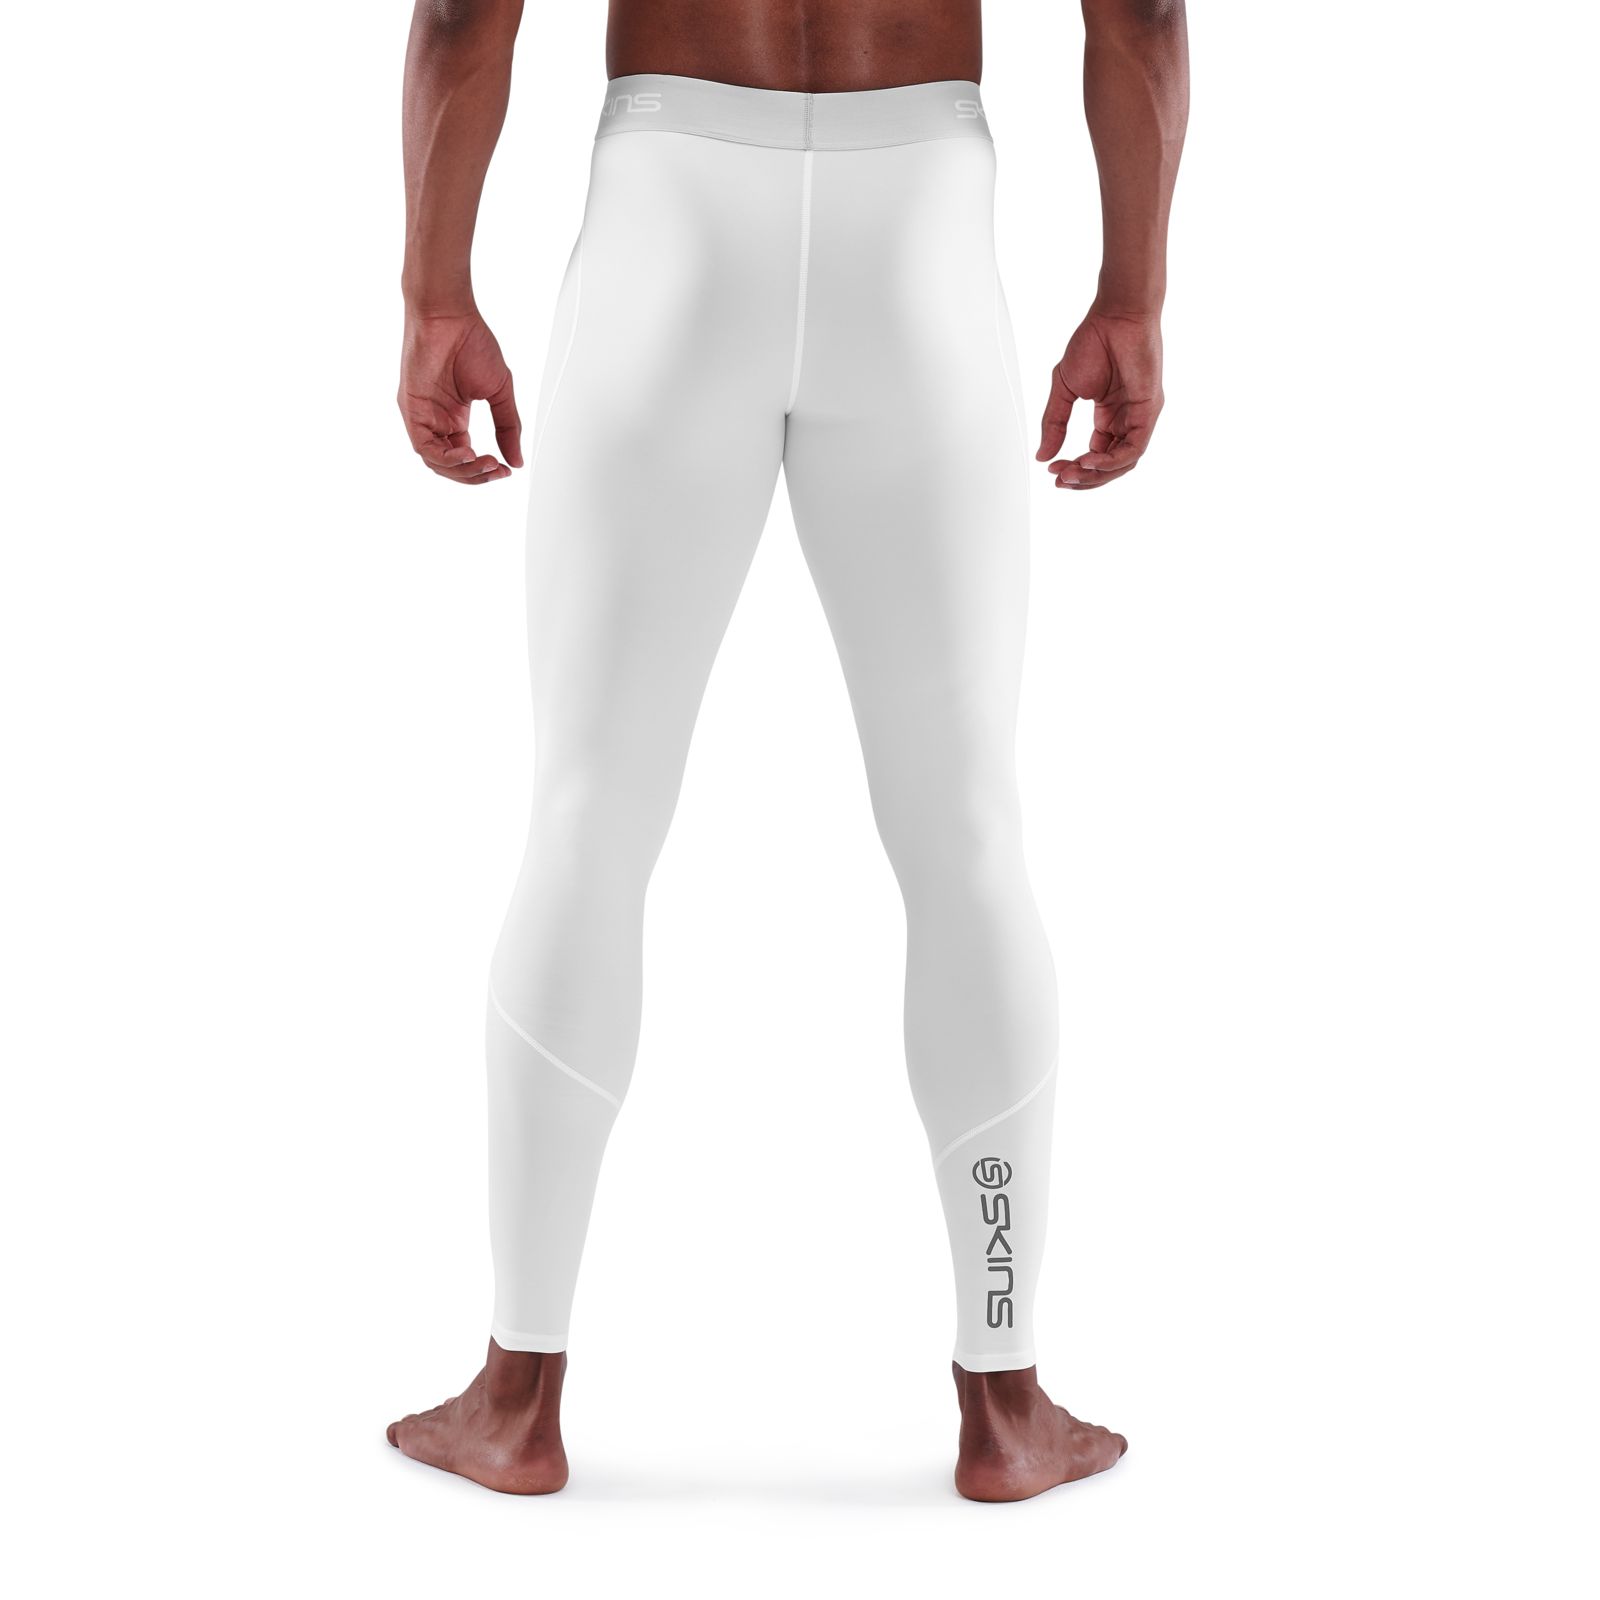 Xmarks Men's Compression Tights Running Pants Baselayer Legging White S